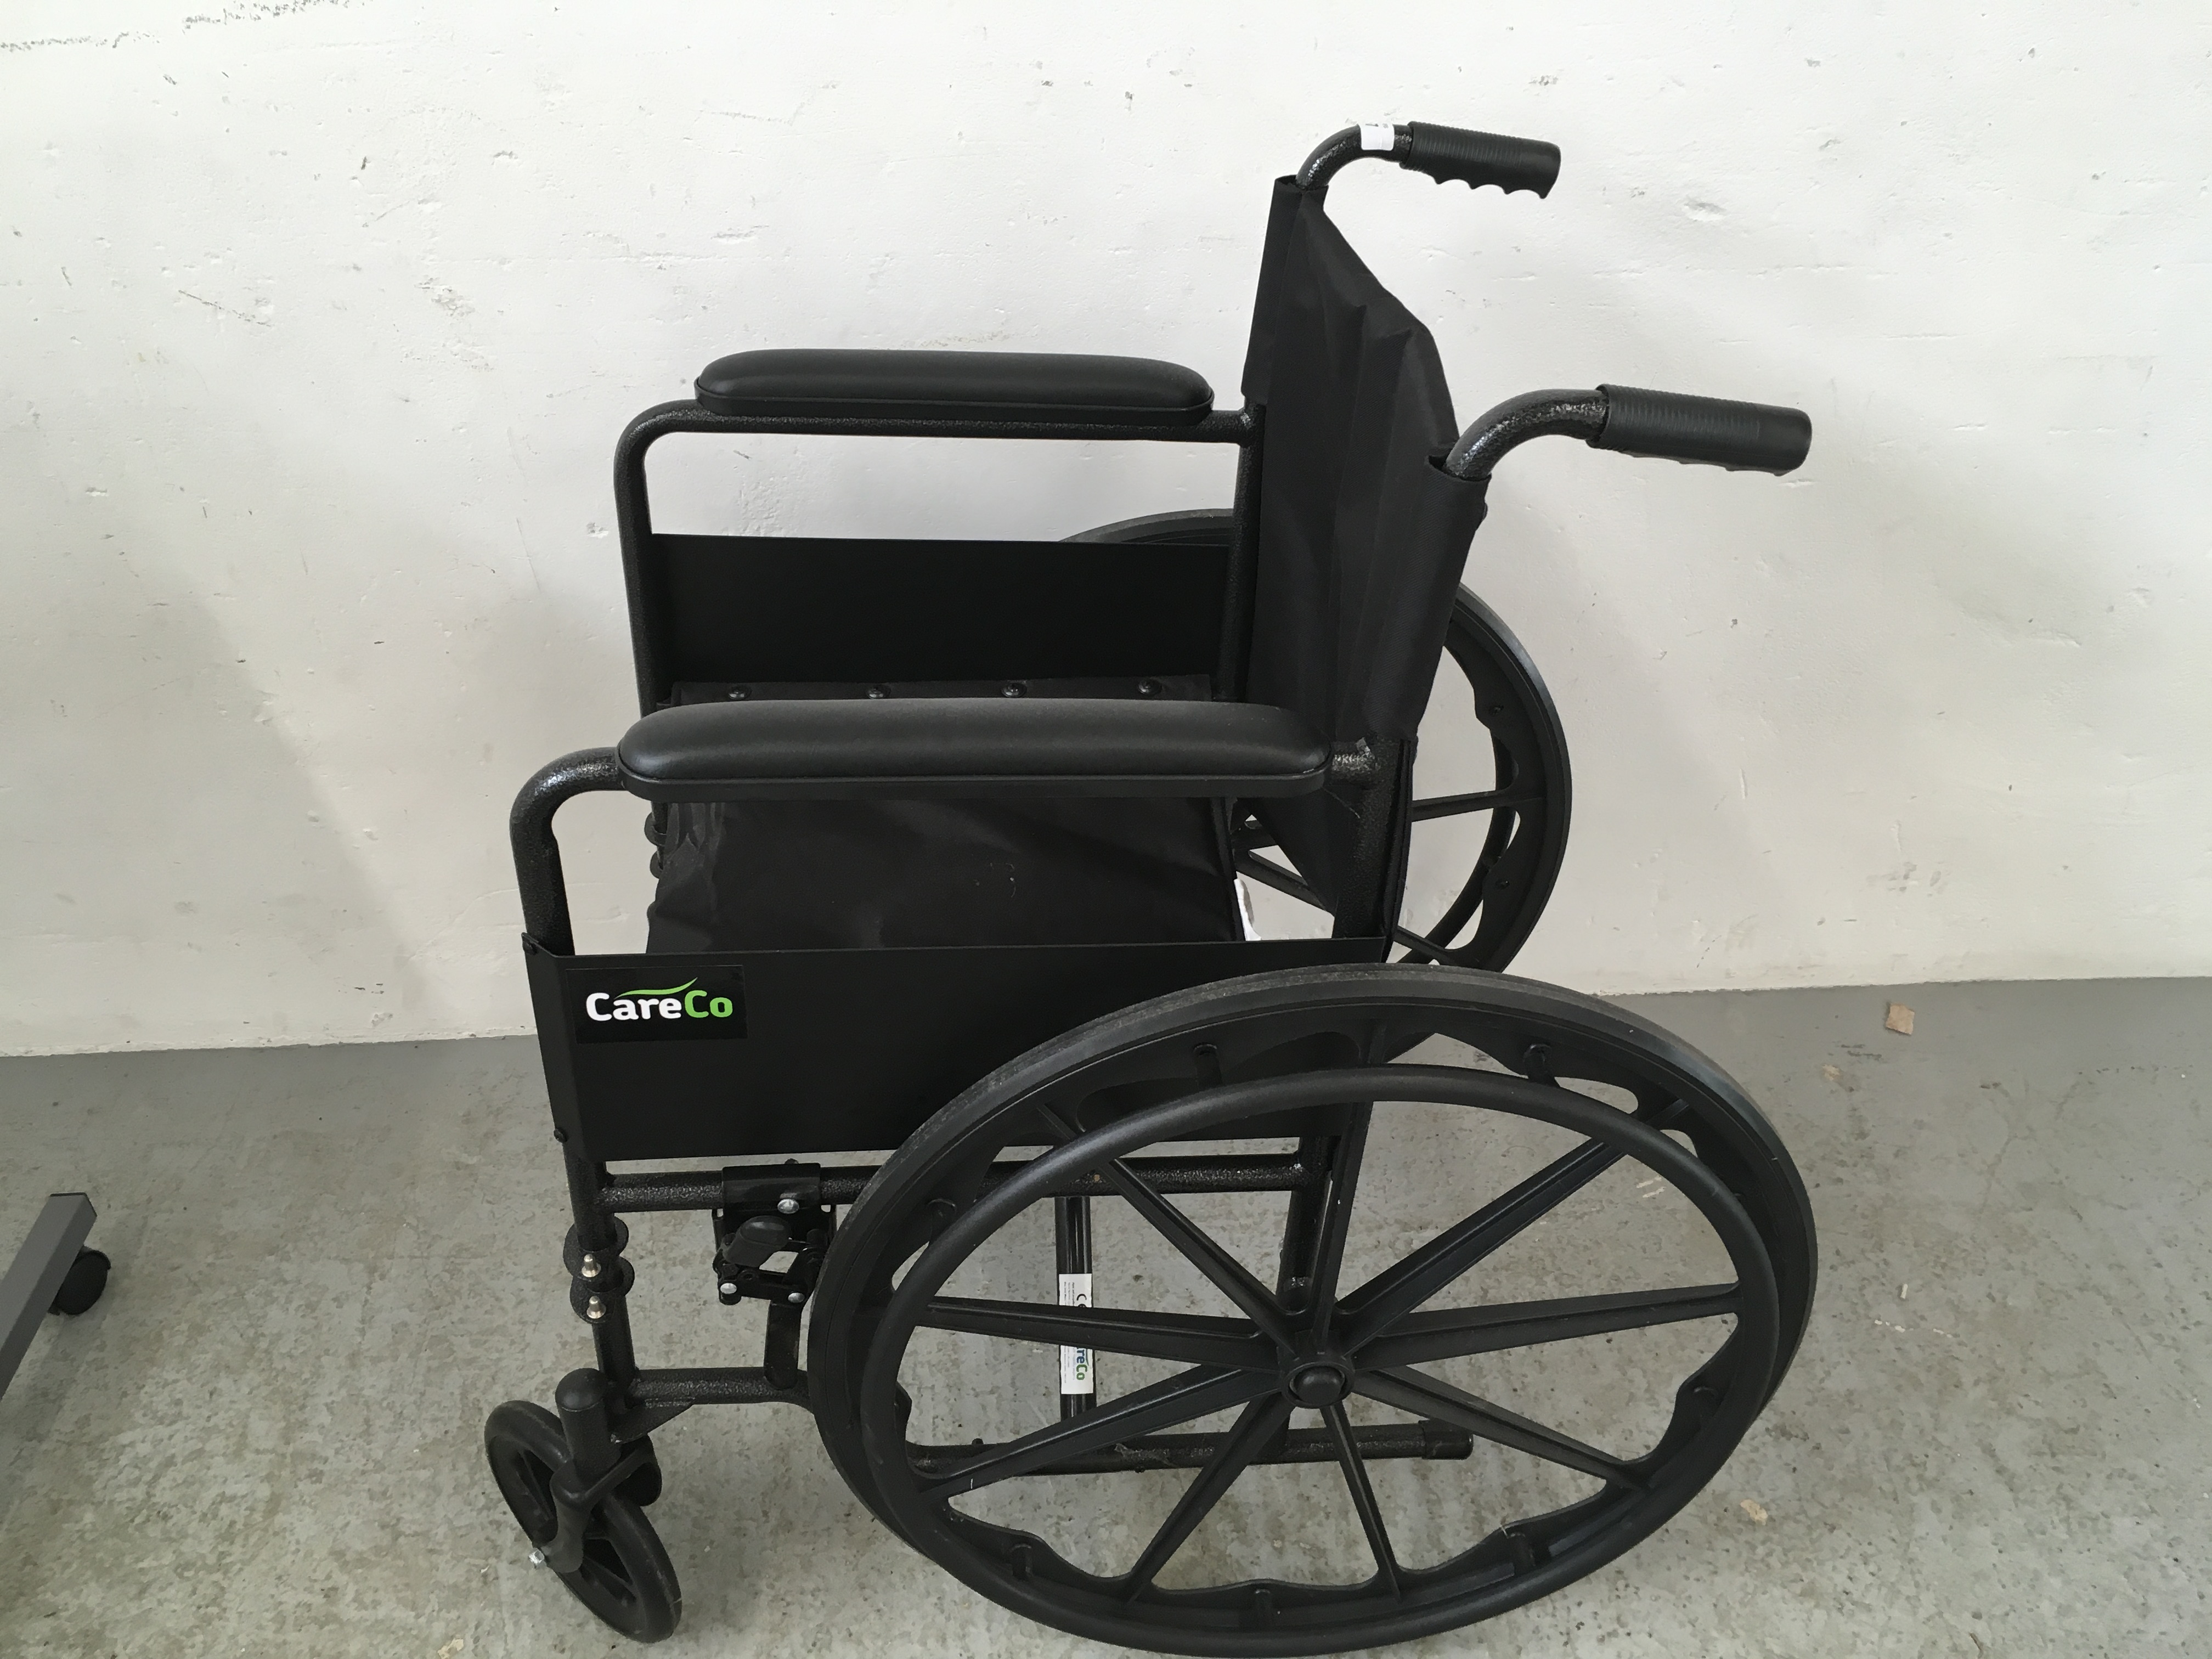 CARE CO WHEEL CHAIR AND FOOT RESTS ALONG WITH A WHEELED BED TRAY - Image 5 of 9